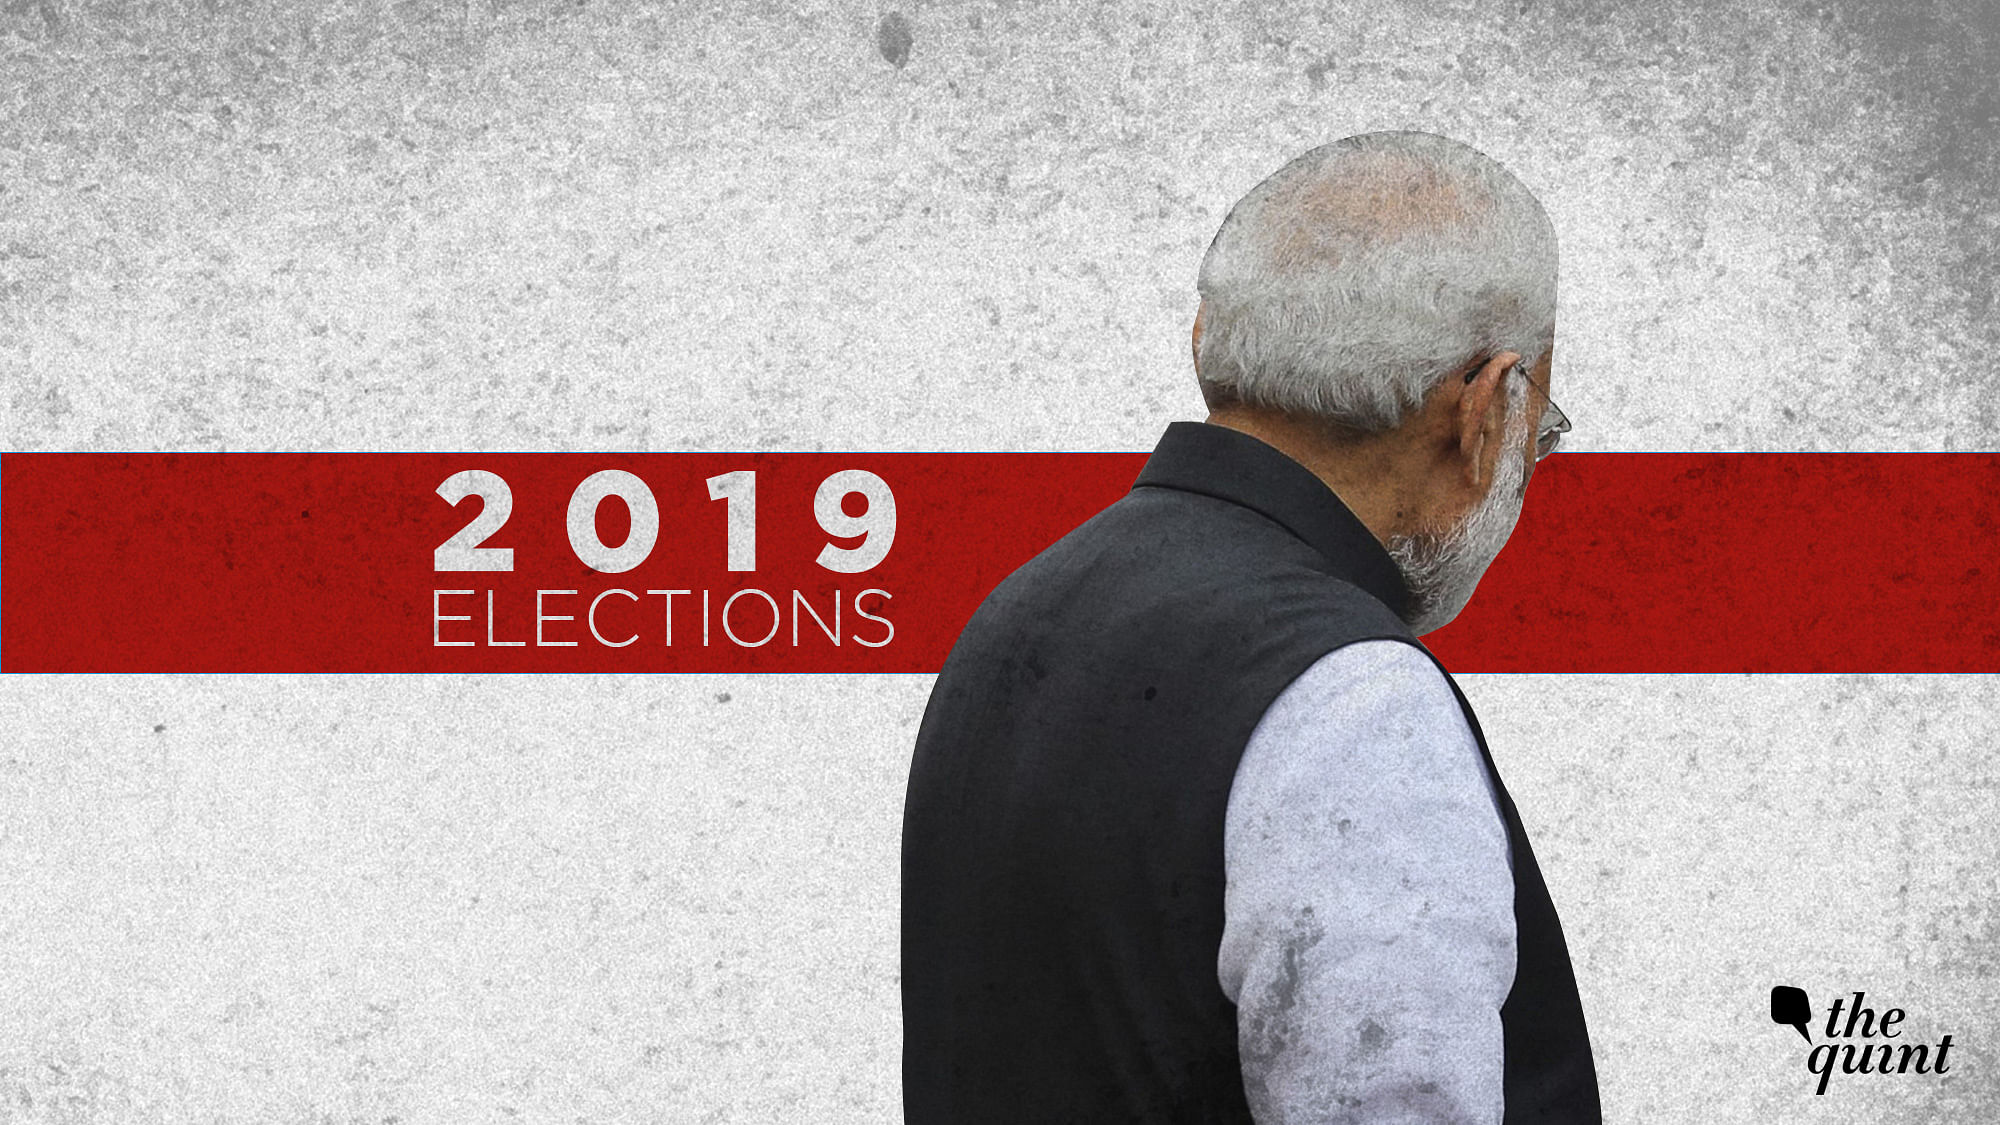 Based on these assembly elections, PM Modi and BJP could lose 30-35 seats from these five poll-bound states in the 2019 general elections.